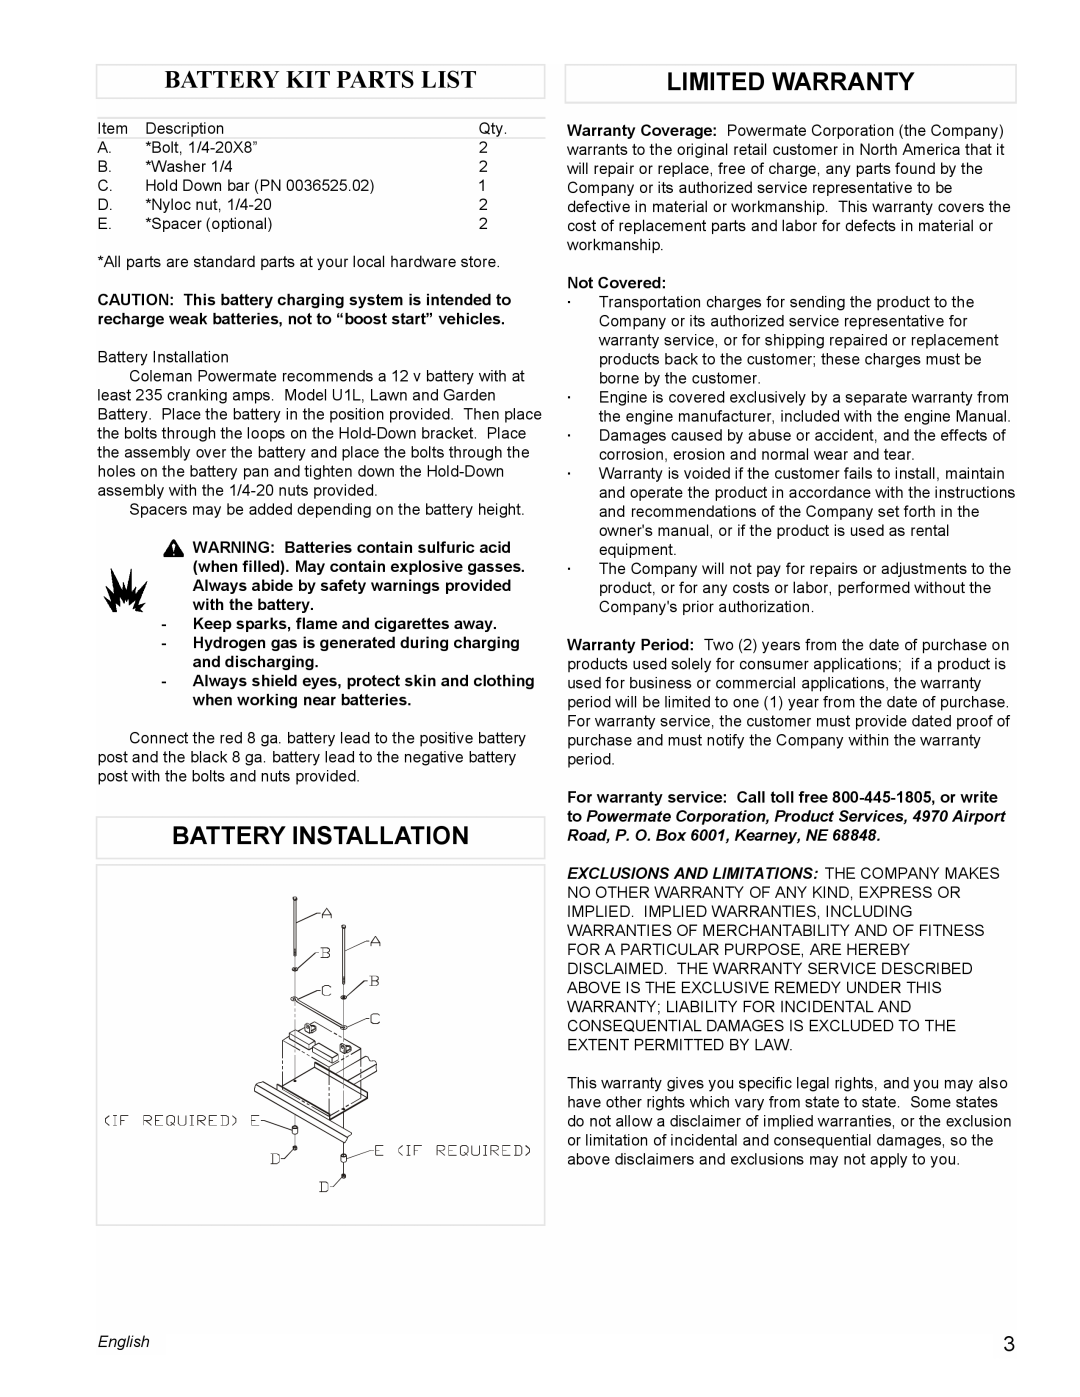 Powermate PM0545001 manual Limited Warranty, Battery Installation, Battery Kit Parts List, English 